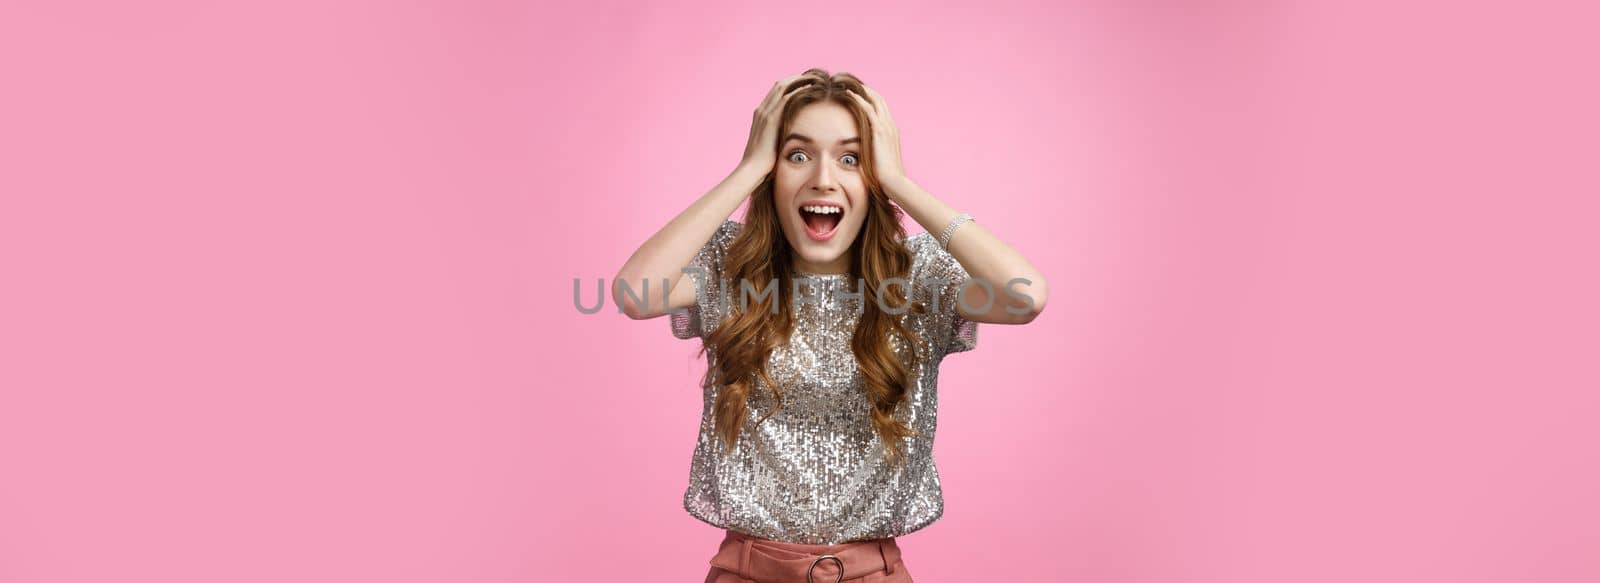 Excited happy surprised charming glamour young girl winning unexpectedly grab head amazed drop jaw smiling look camera astonished thrilled happiness, standing astonished pink background.